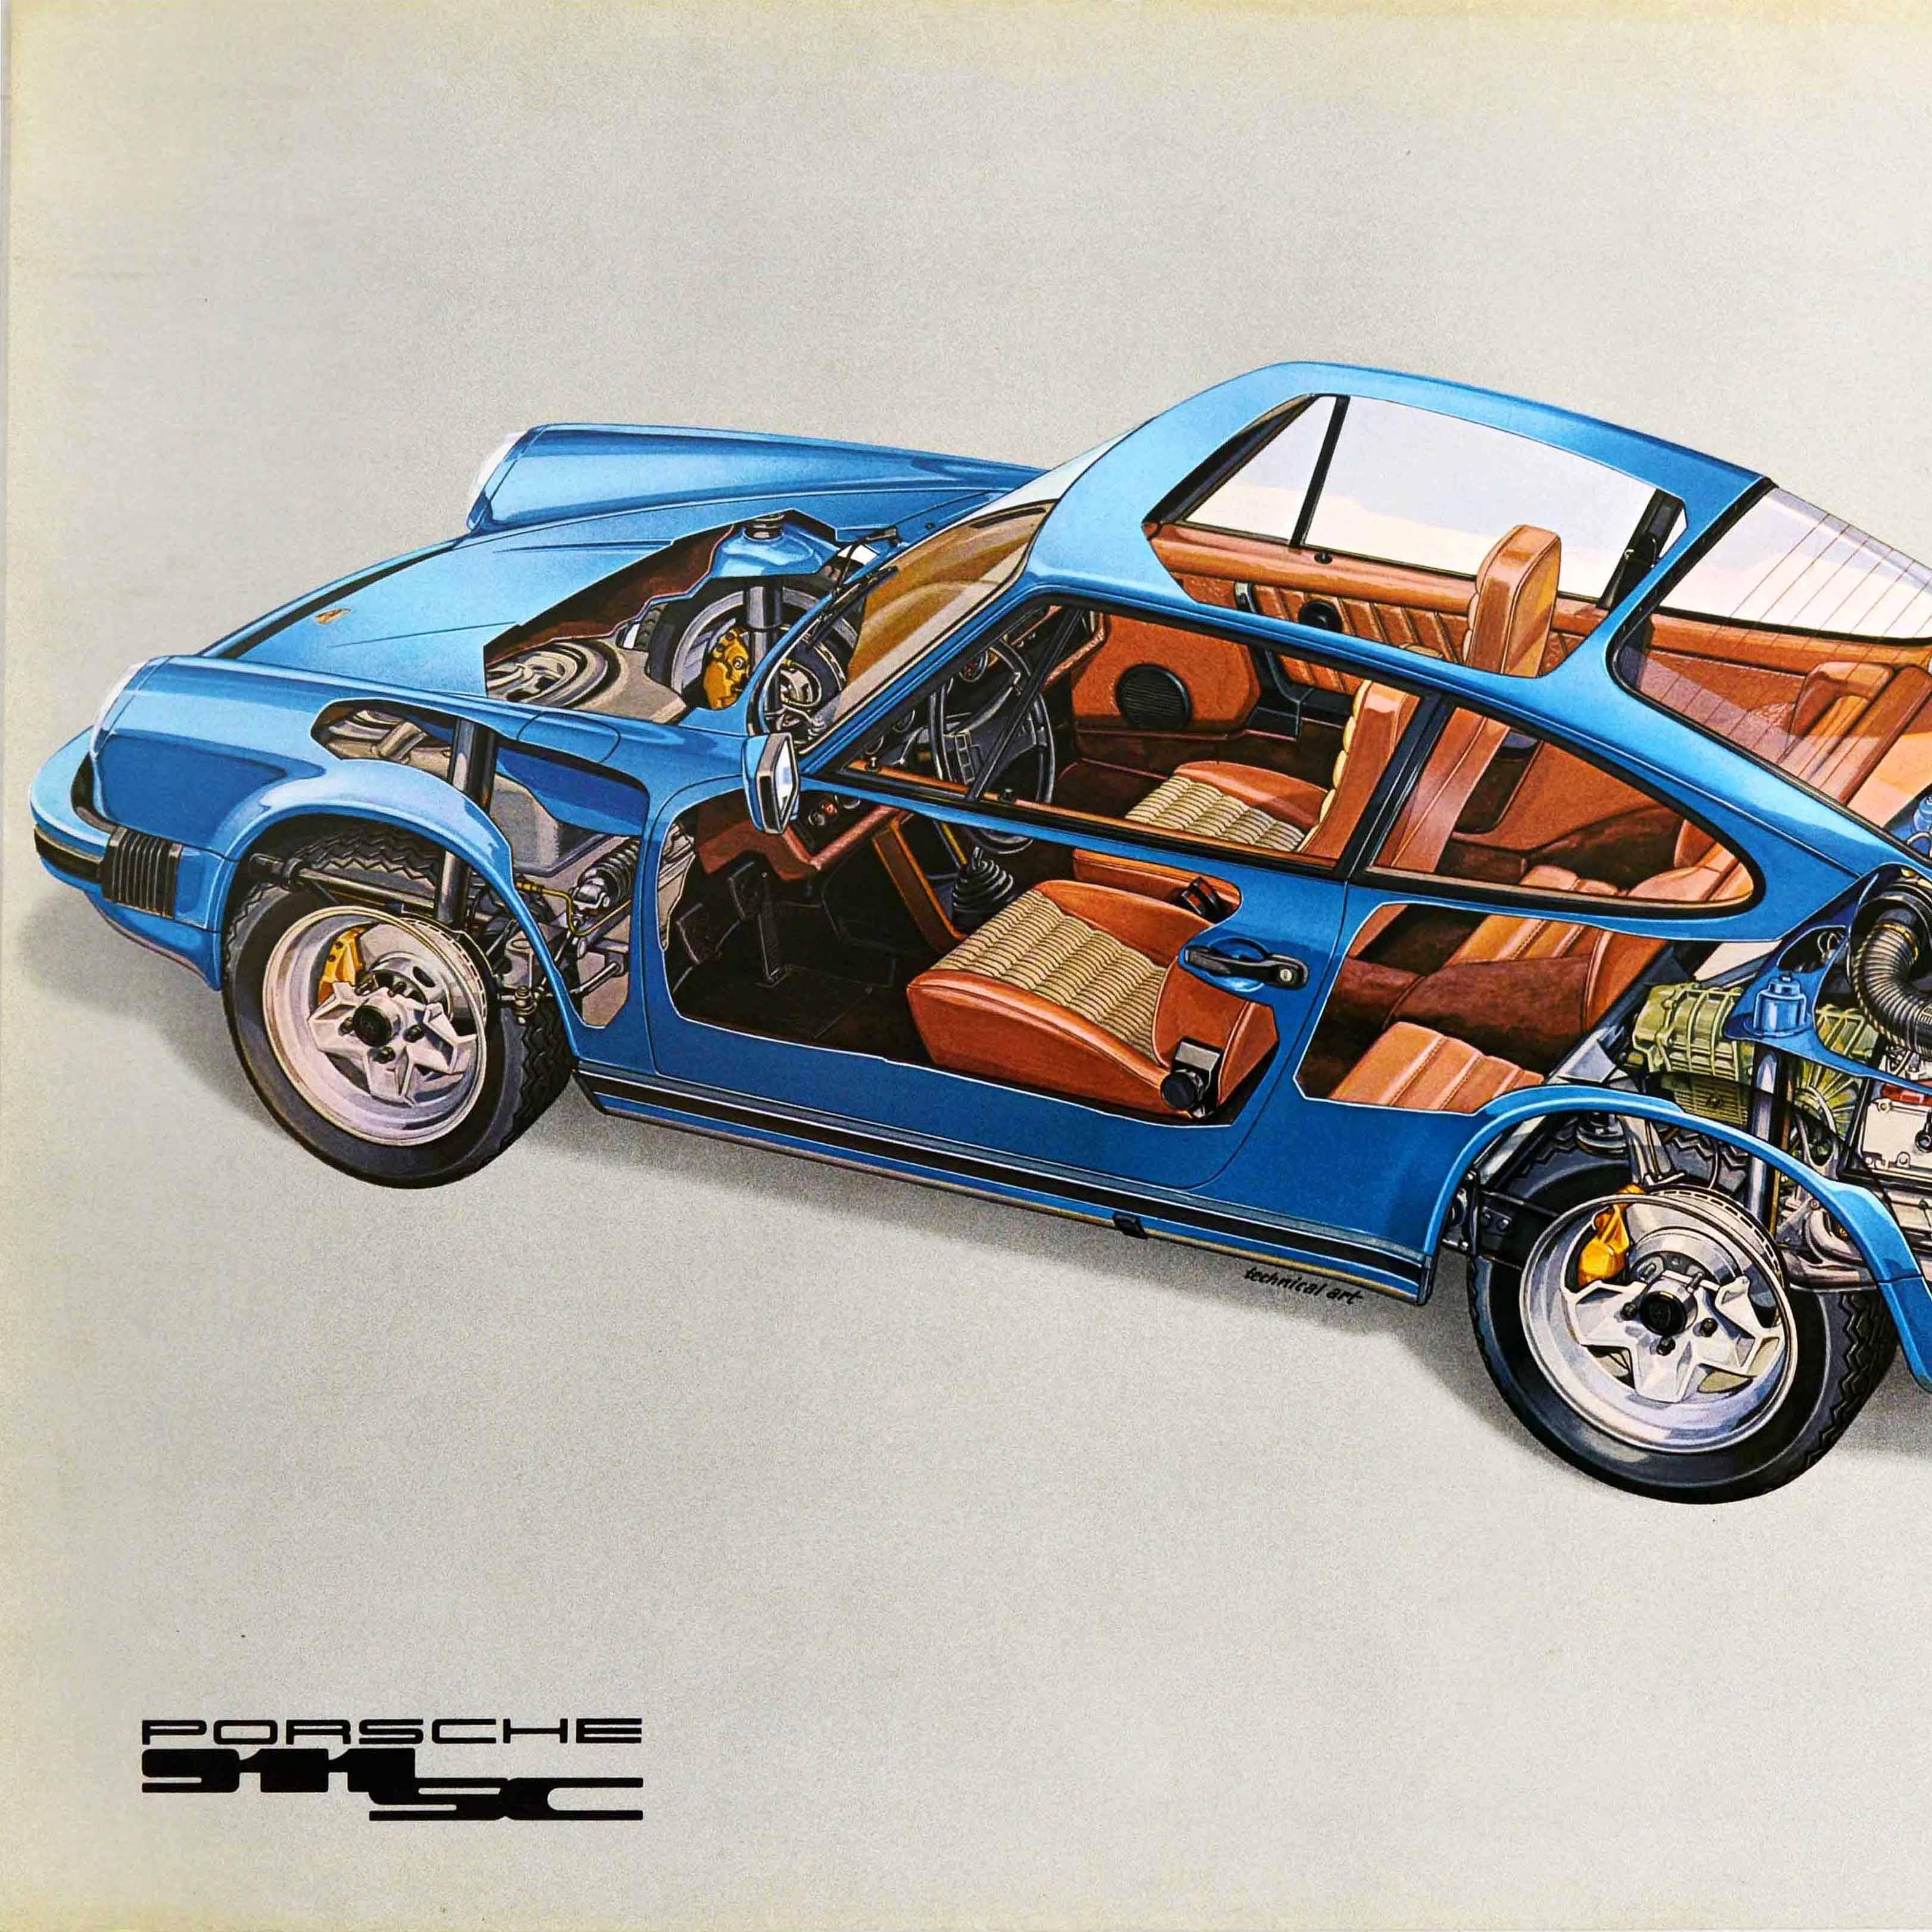 Original vintage car dealership advertising poster - Porsche 911 SC - featuring a cut out design showing the exterior and interior of the sports car viewed from the side and through the roof including the engine and wheels, seating and inner